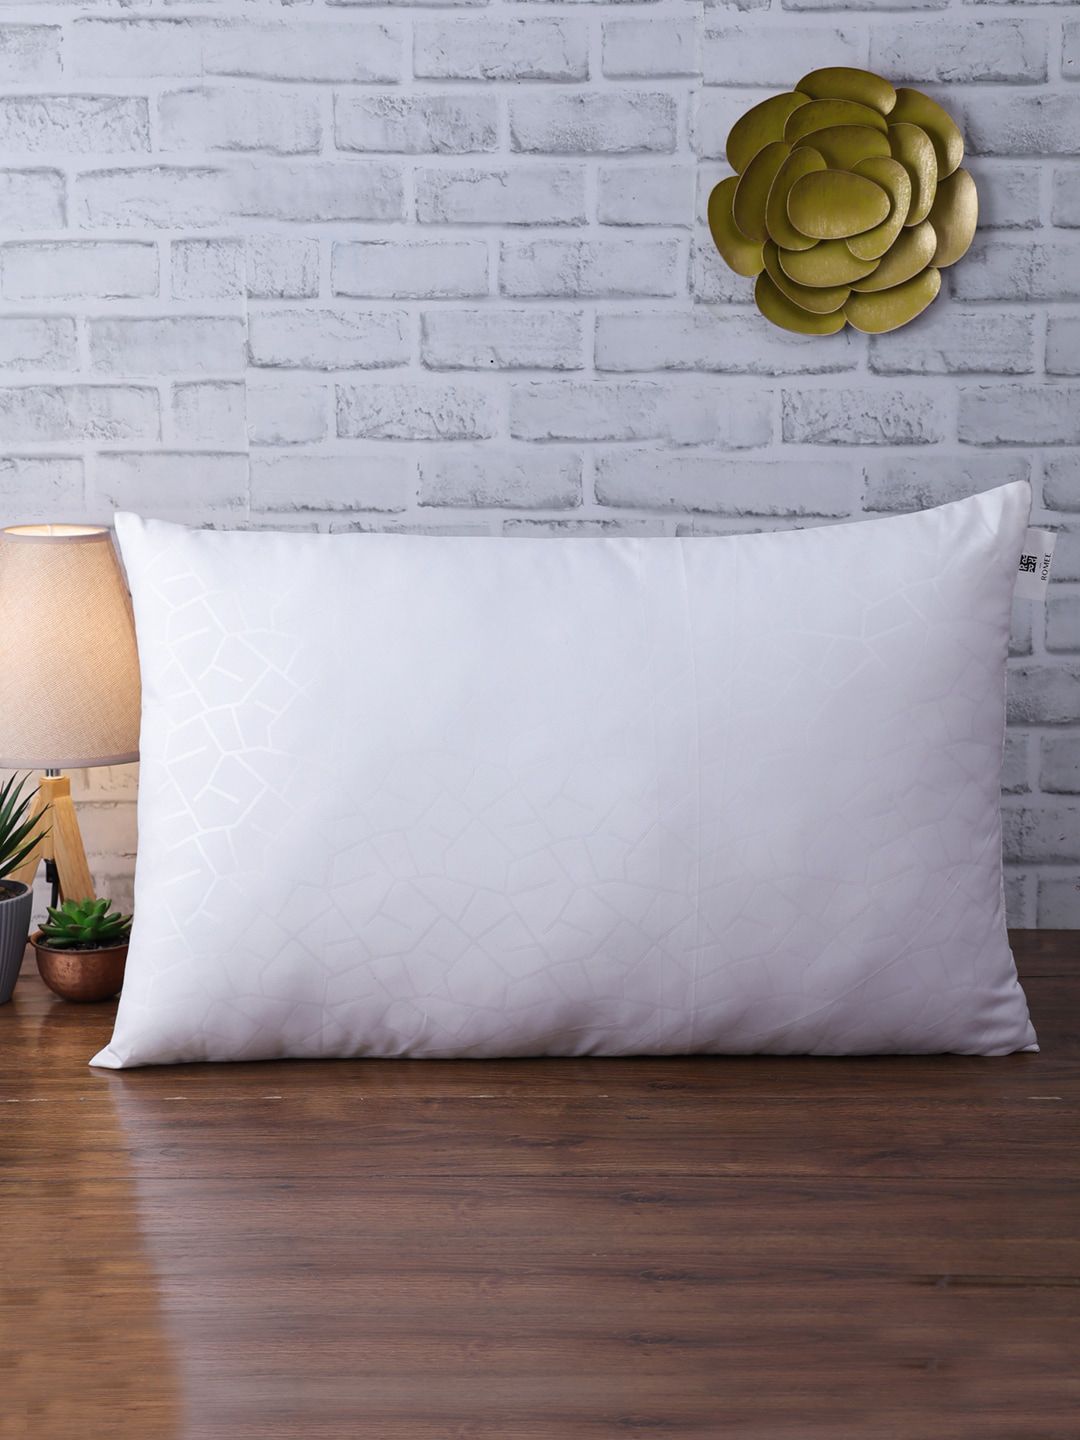 ROMEE White Jacquard Bed Pillow Price in India